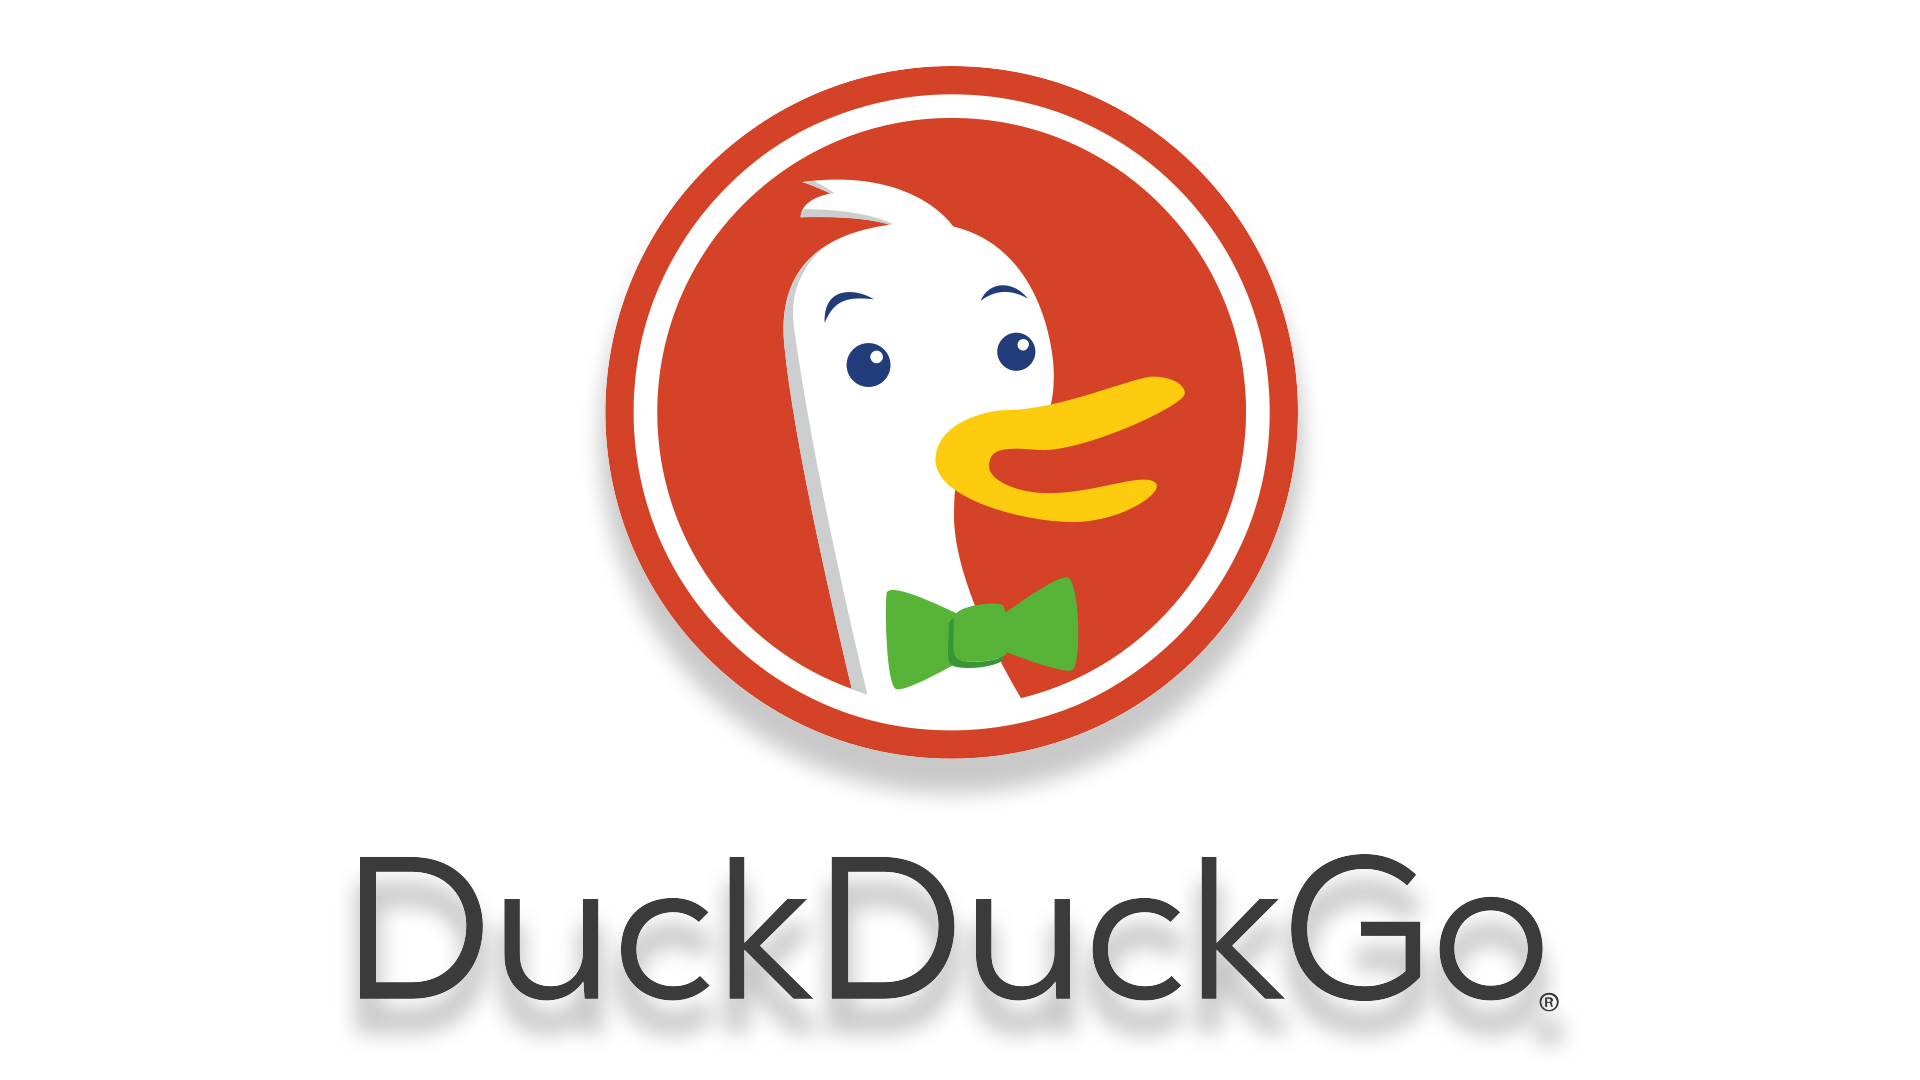 The DuckDuckGo logo on a white background